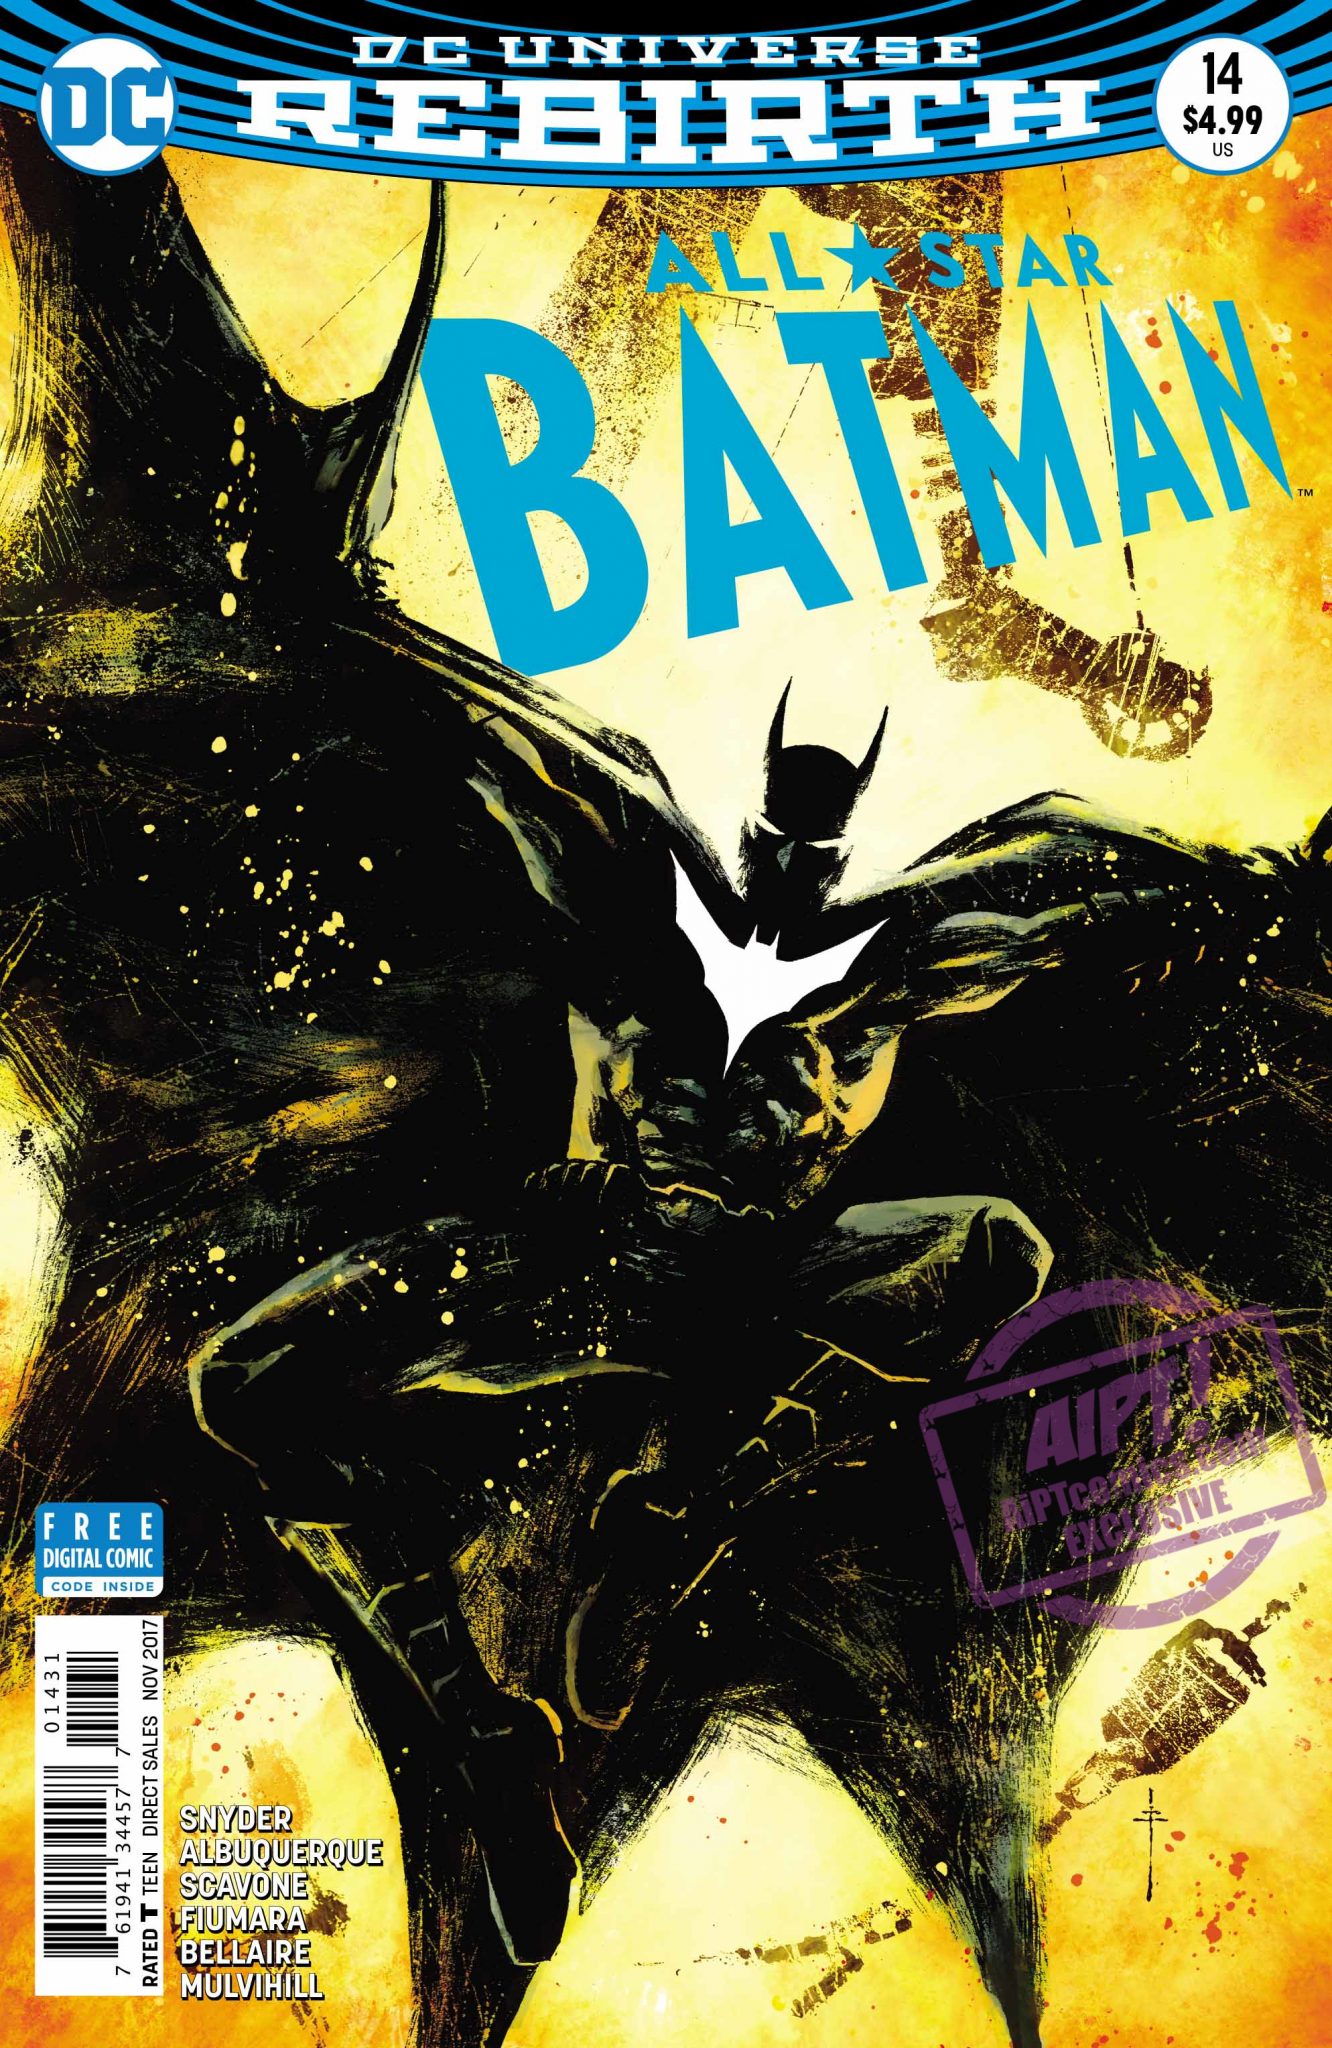 [EXCLUSIVE] DC Preview: All-Star Batman #14